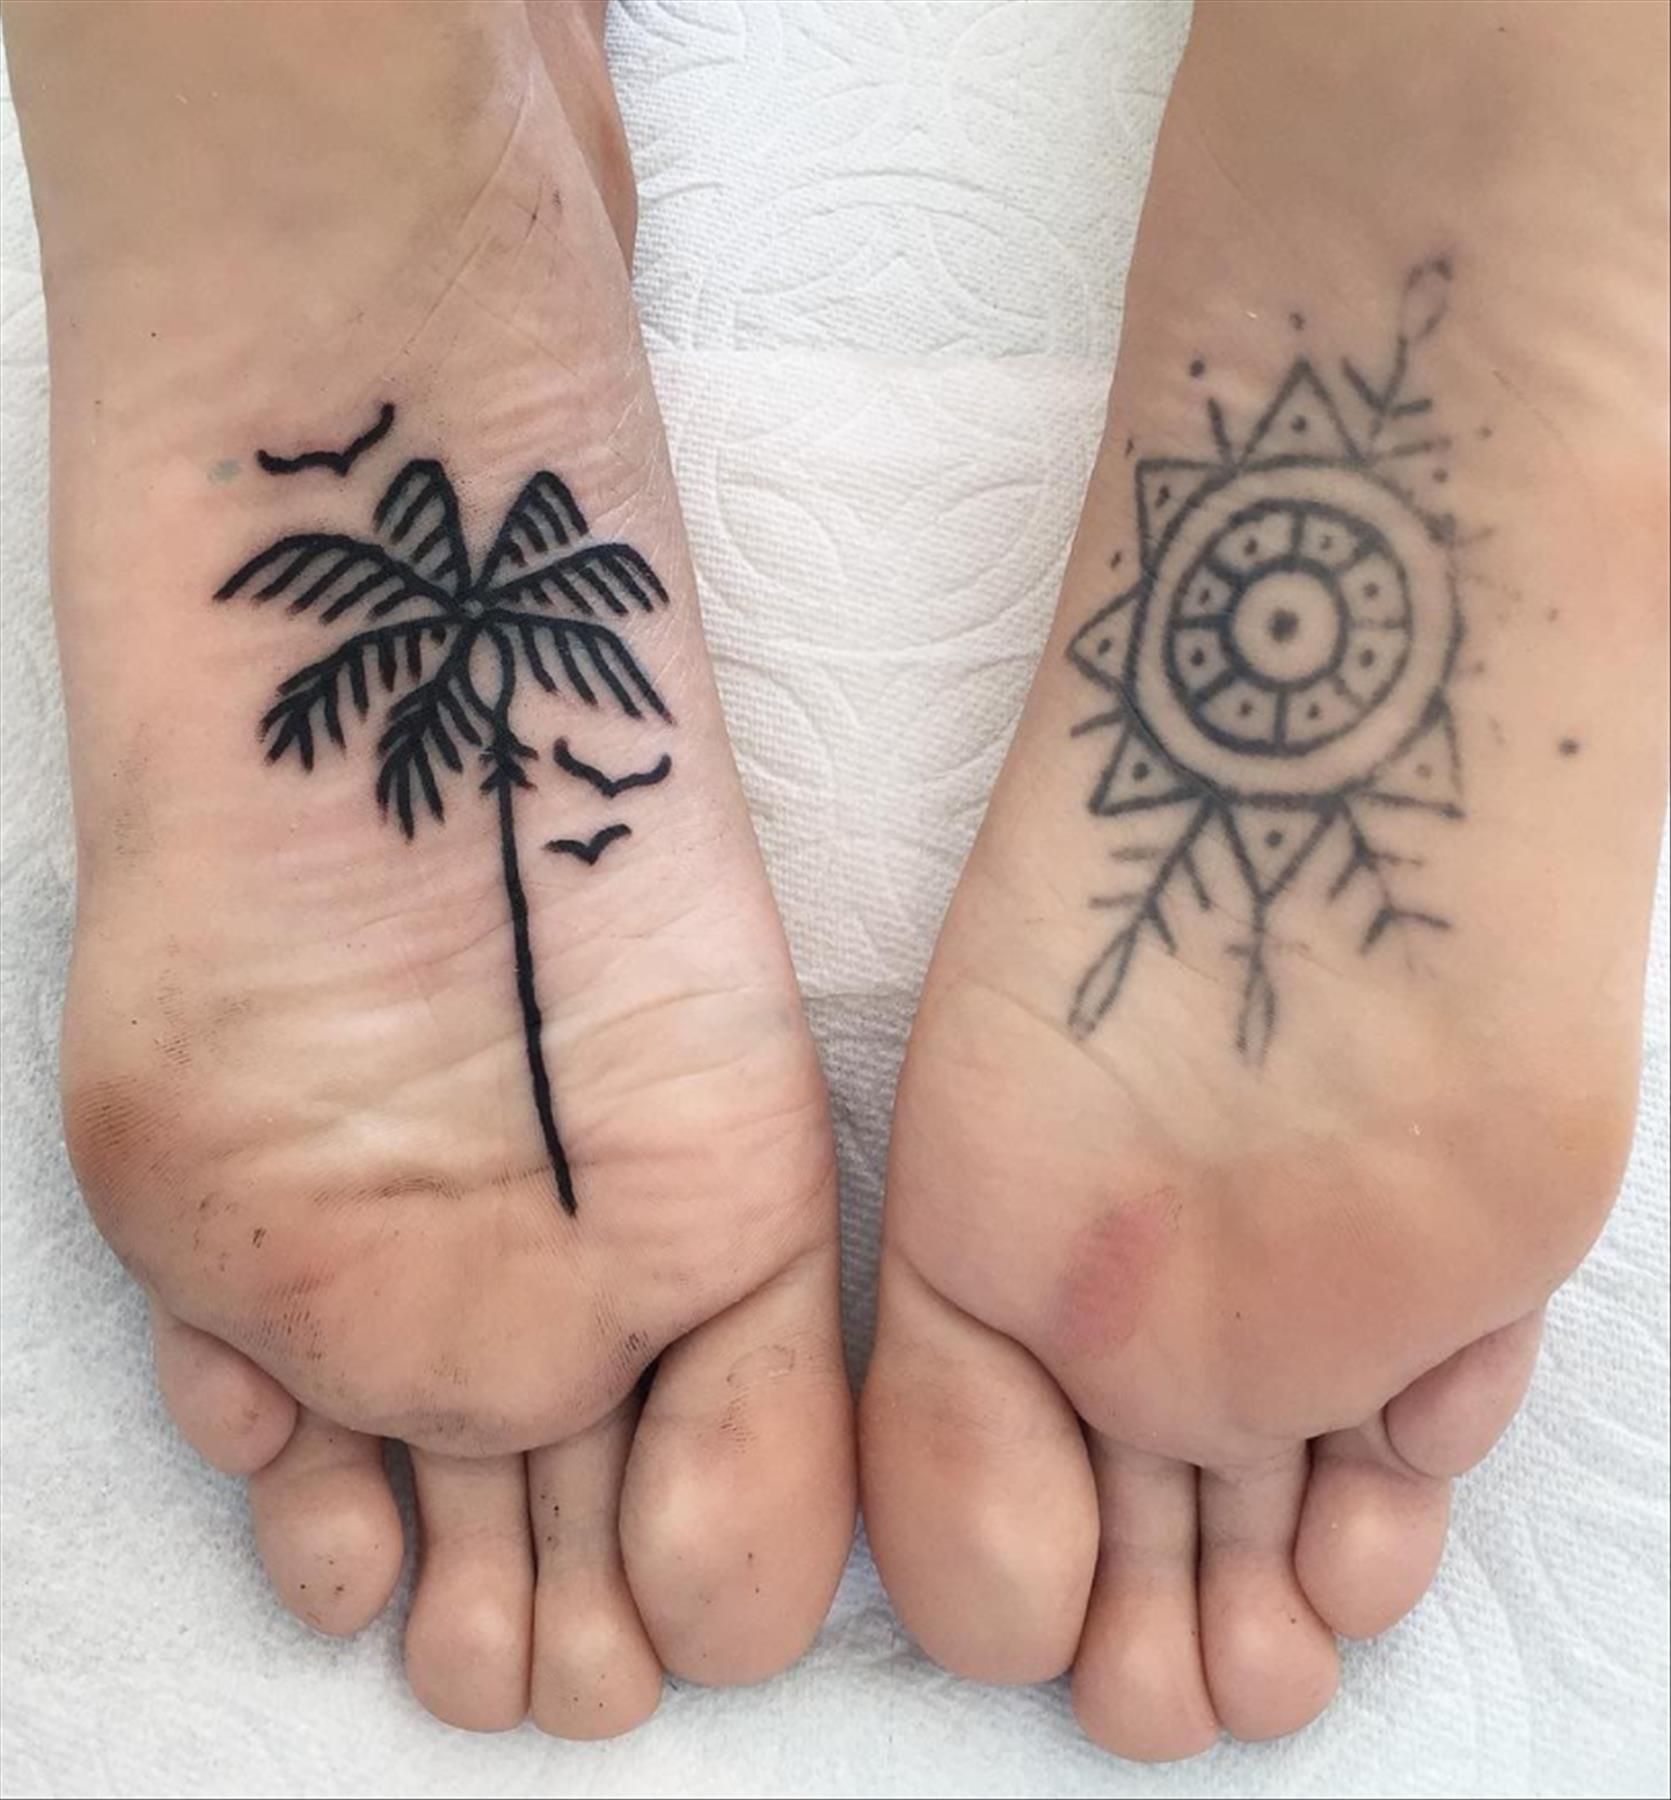 Unique foot tattoos for women to get inspiration